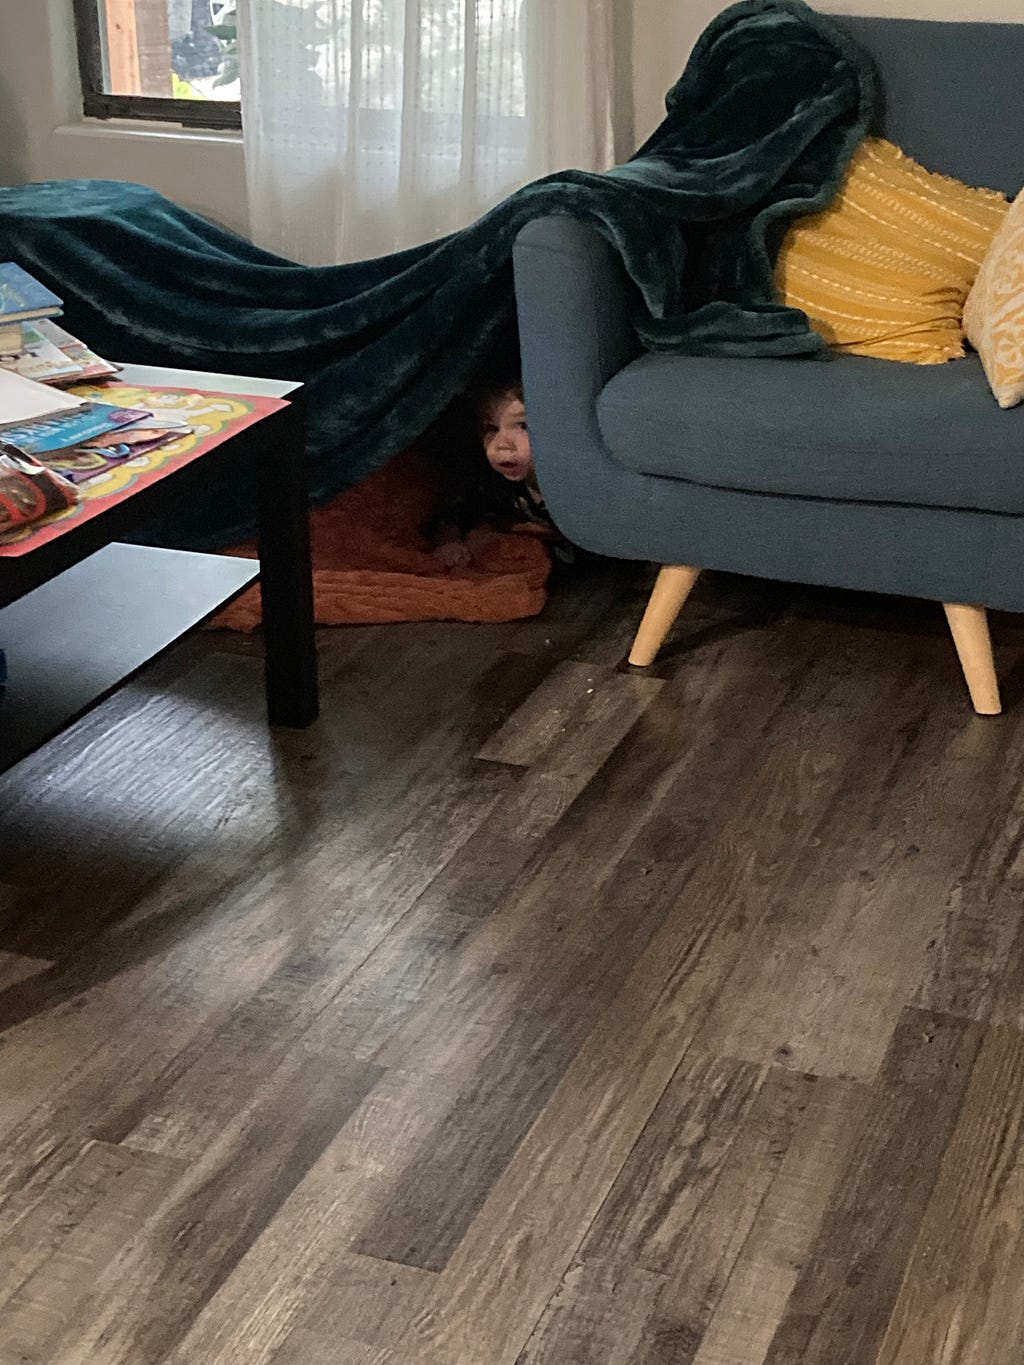 My nephew in his first ever fort — a series of blankets thrown over sofas and tables to create a little den for him.